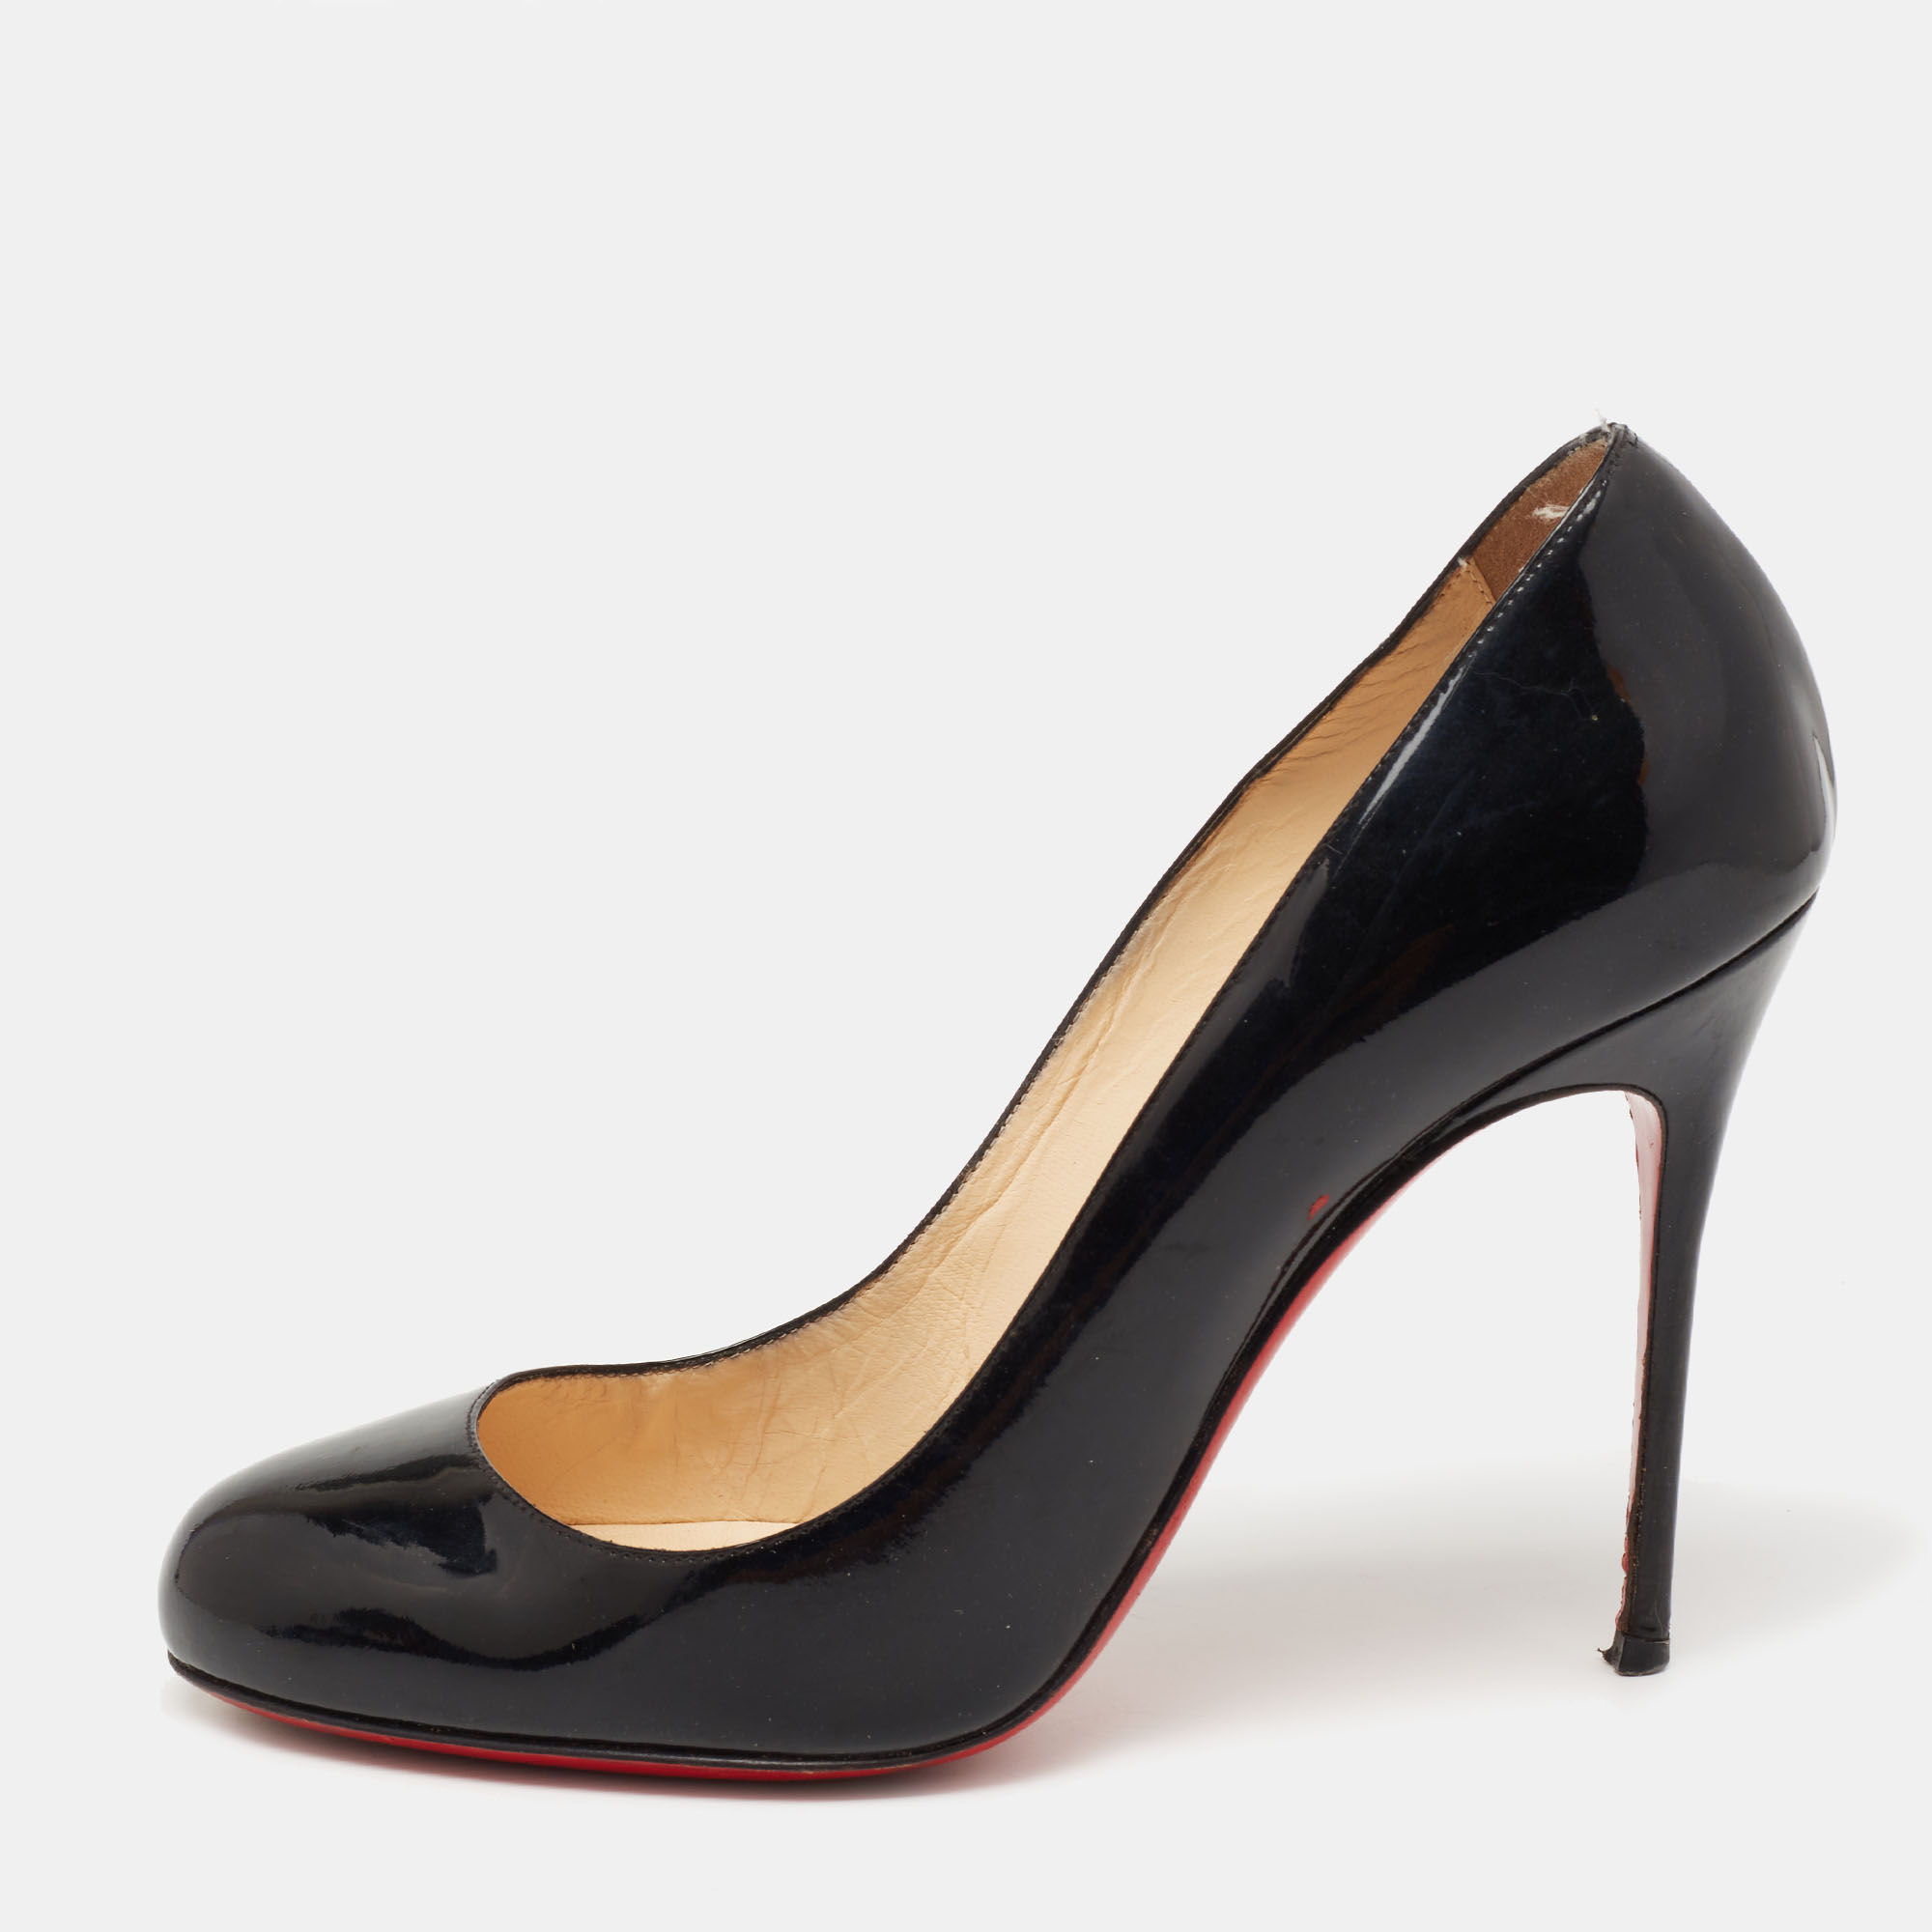 Exuding feminity and elegance these Christian Louboutin pumps feature a simple silhouette with an attractive design. You can wear these pumps for a statement look.